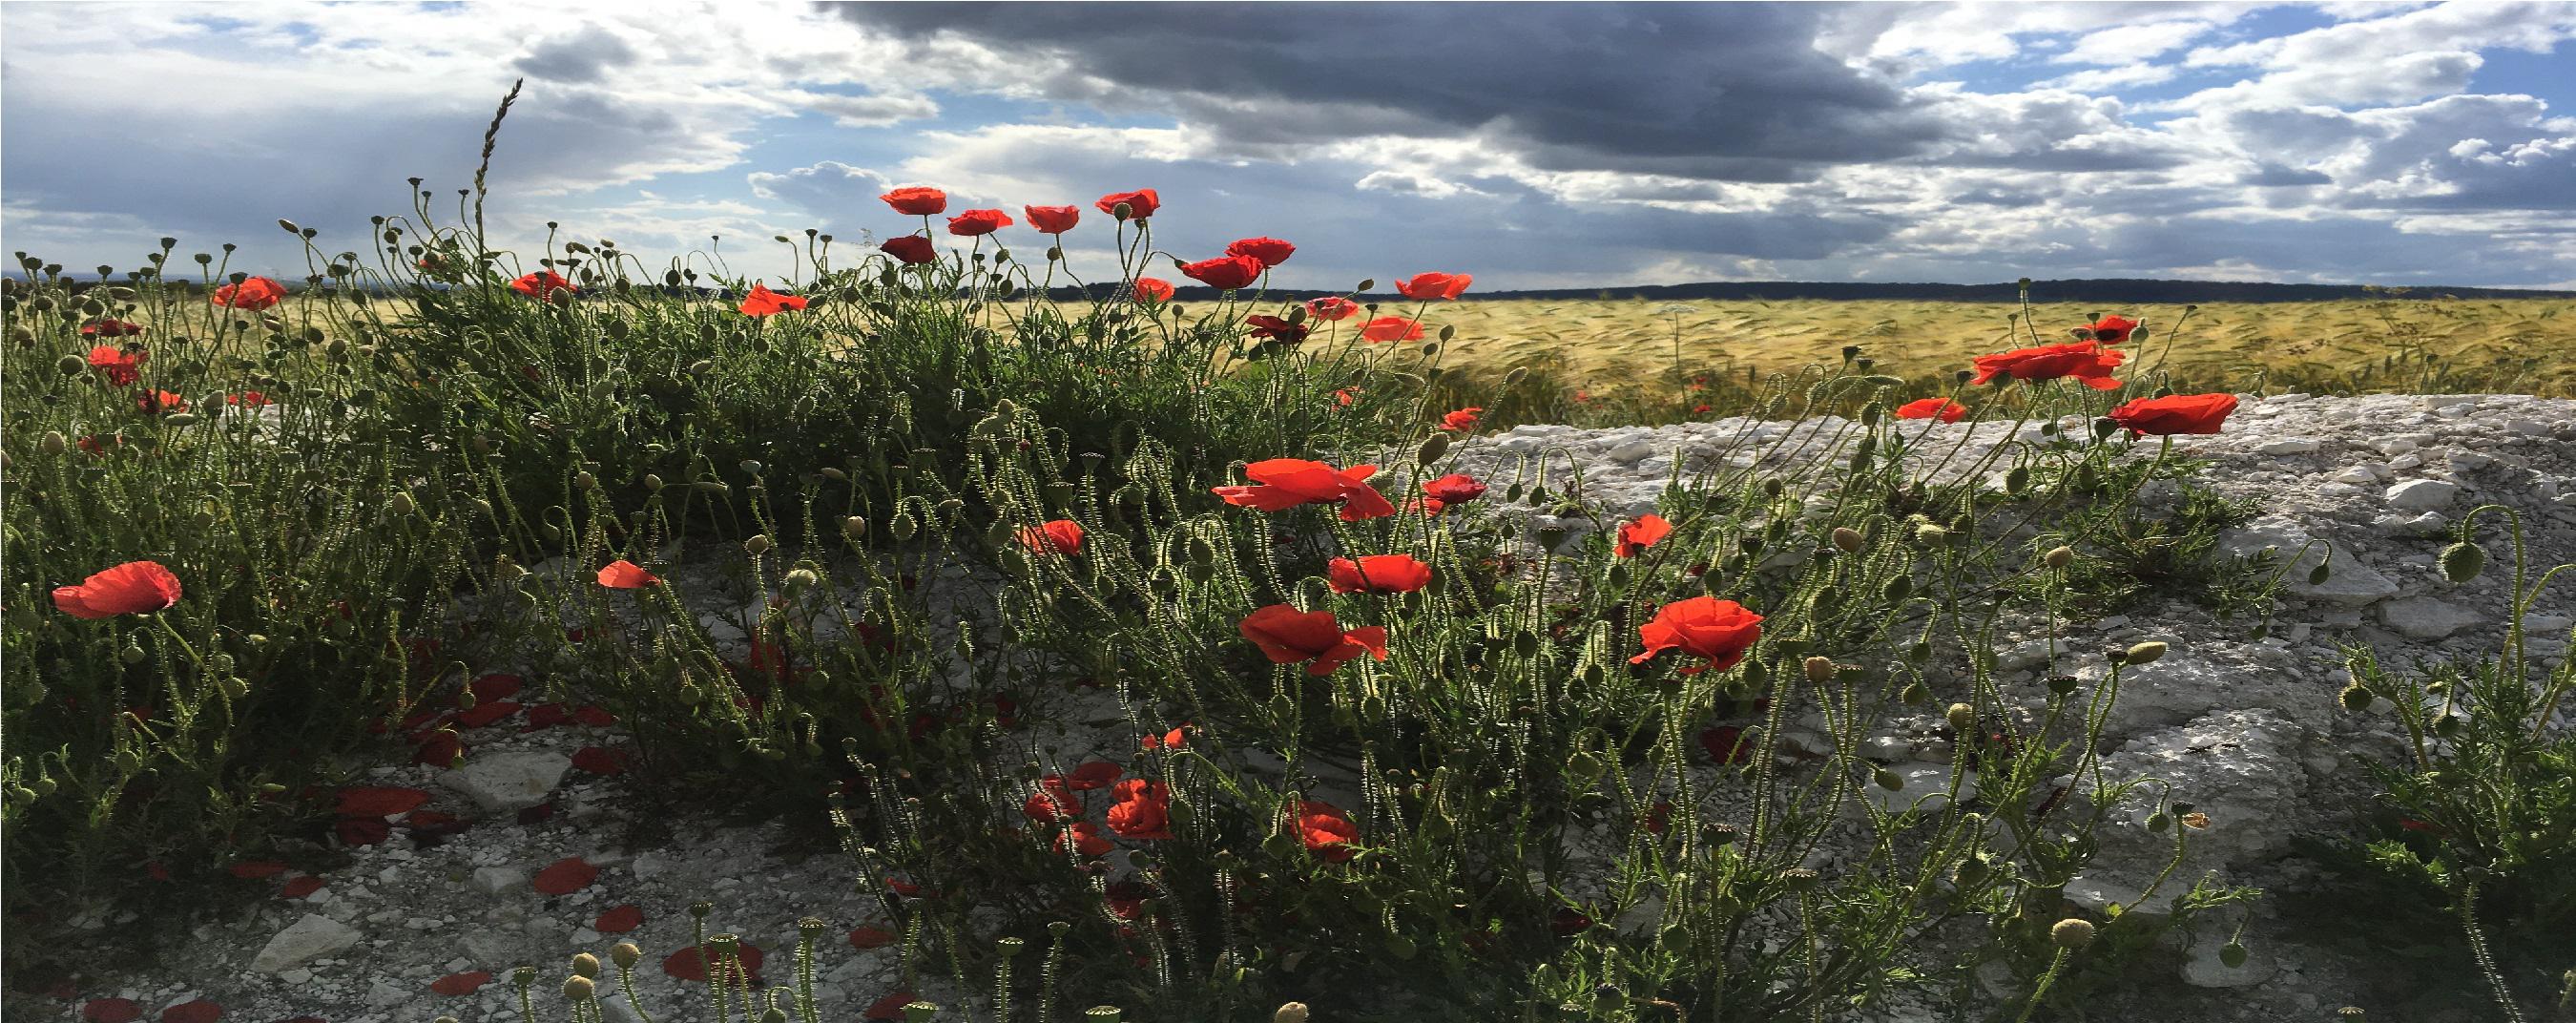 Poppies view